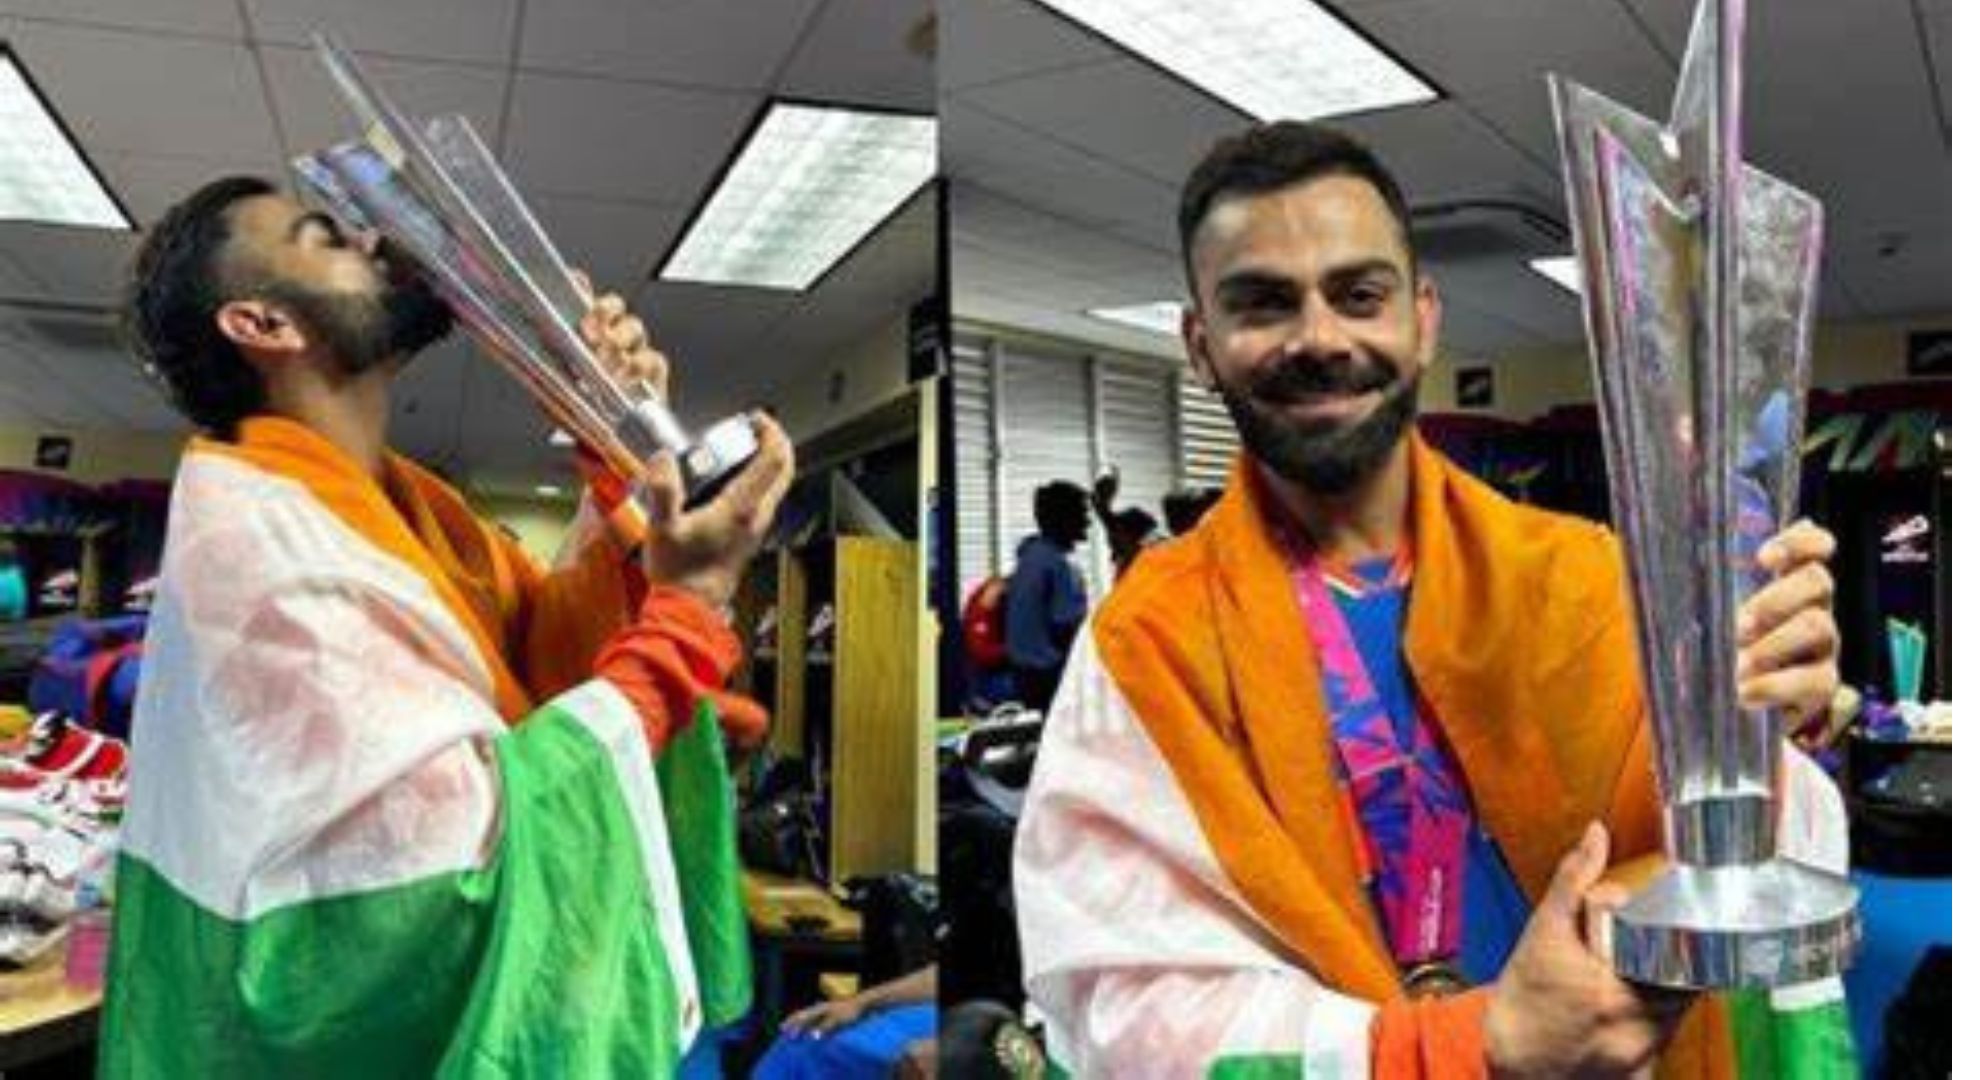 Virat Kohli’s Instagram Sets Record After India’s T20 World Cup Win